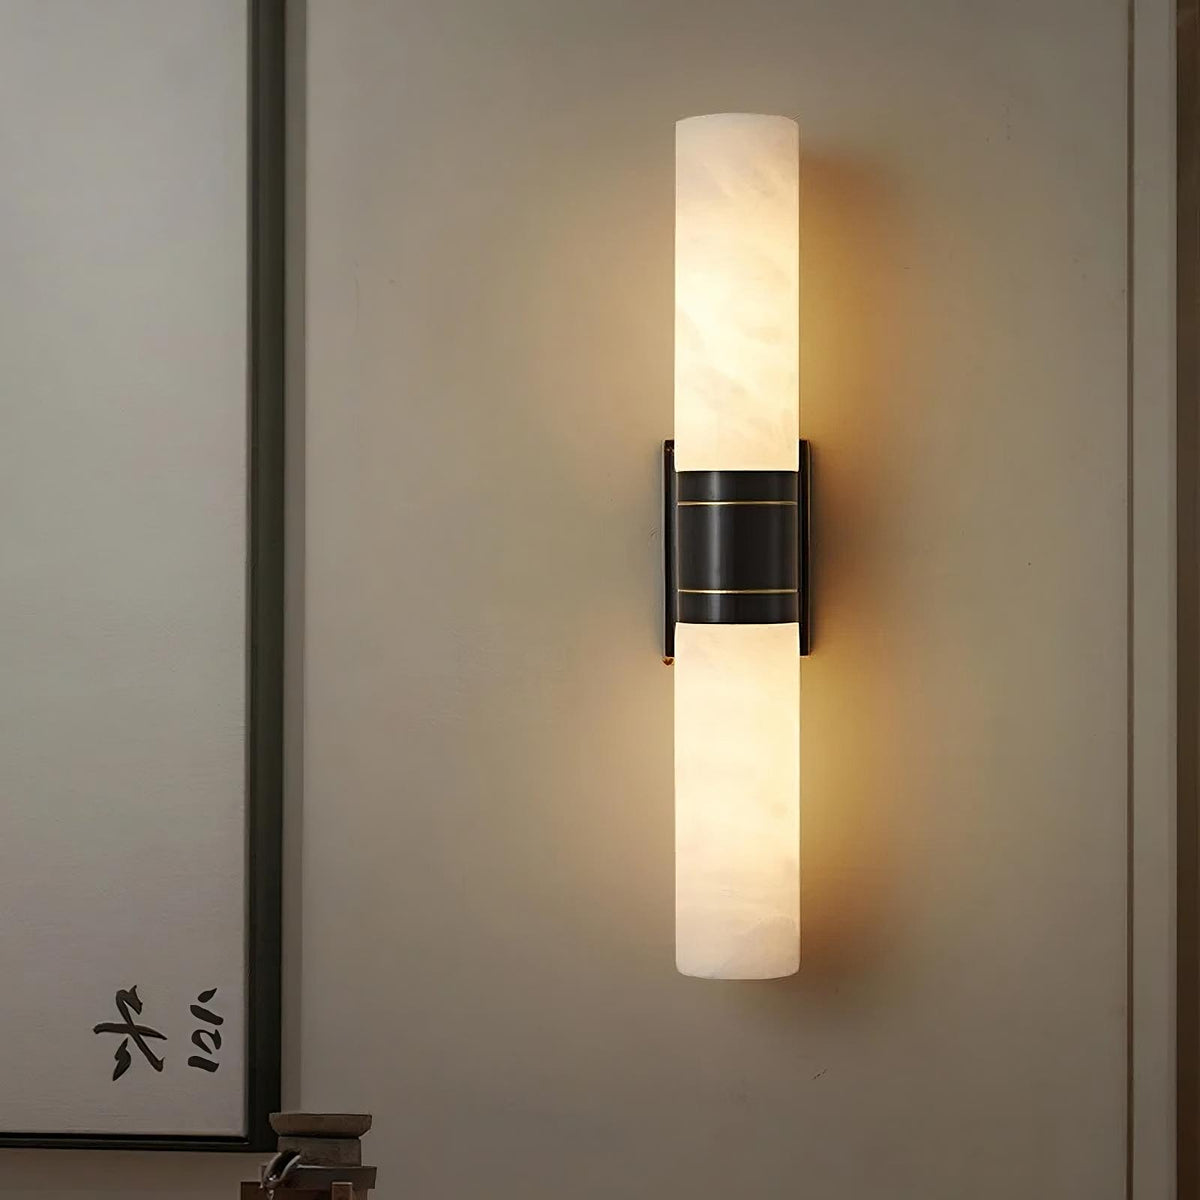 A Morsale.com Natural Marble Indoor Wall Sconce Light with two cylindrical white shades is mounted vertically on a beige wall. The light fixture, featuring a brass light source and black metal bracket, creates a cozy ambiance with its soft warm glow. Asian-style calligraphy is visible nearby, adding to the unique texture of the decor.